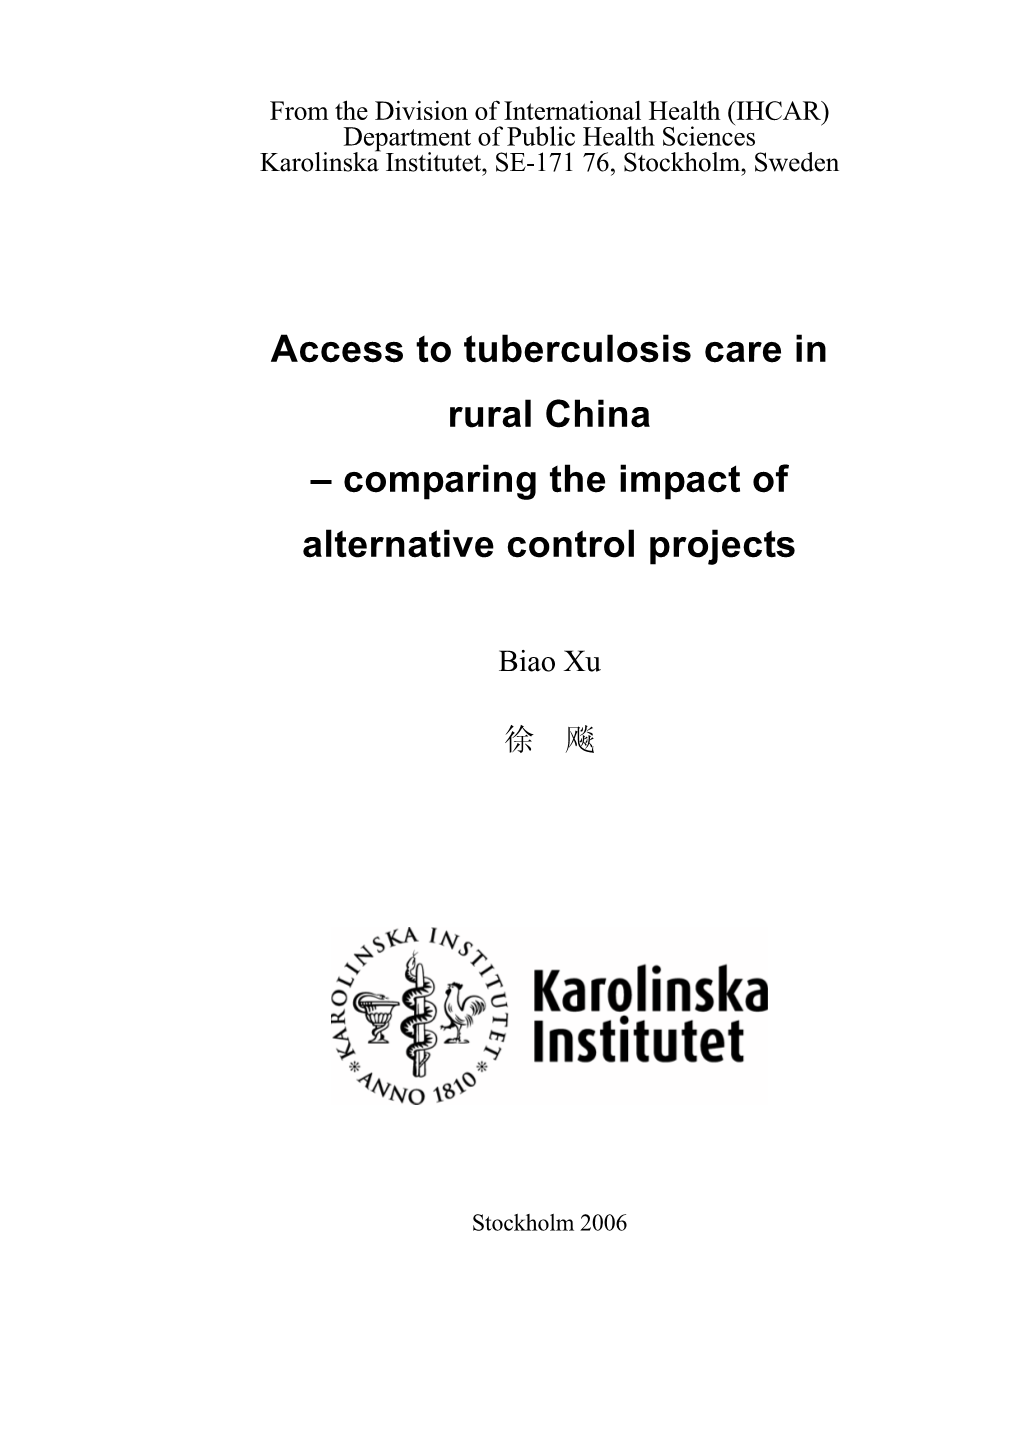 Access to Tuberculosis Care in Rural China – Comparing the Impact of Alternative Control Projects